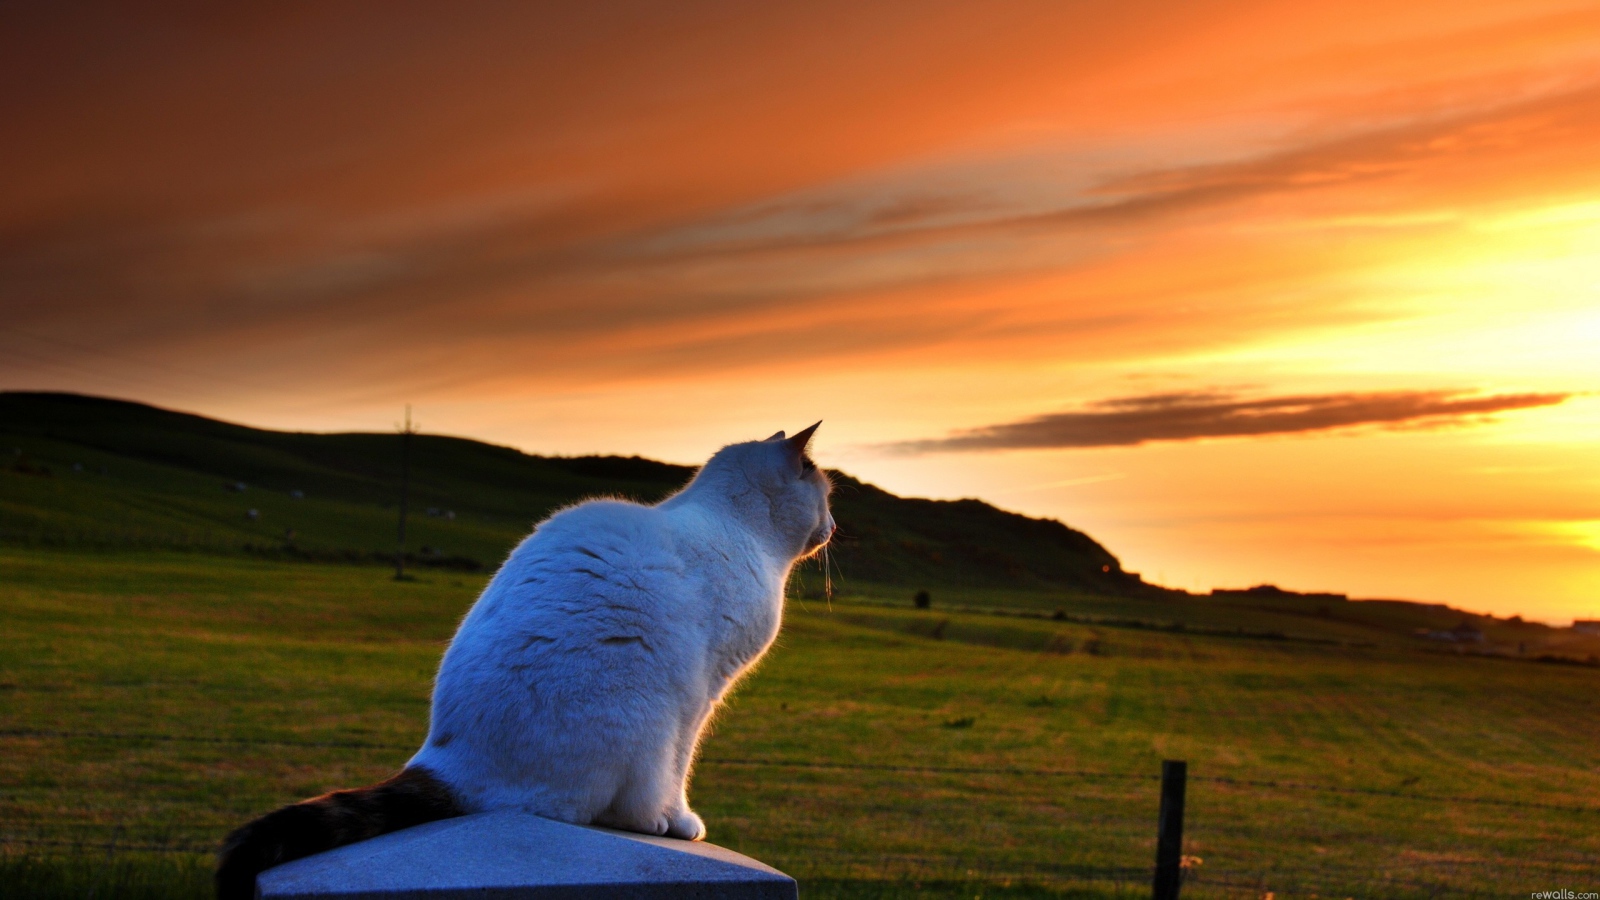 The cat sees the sun